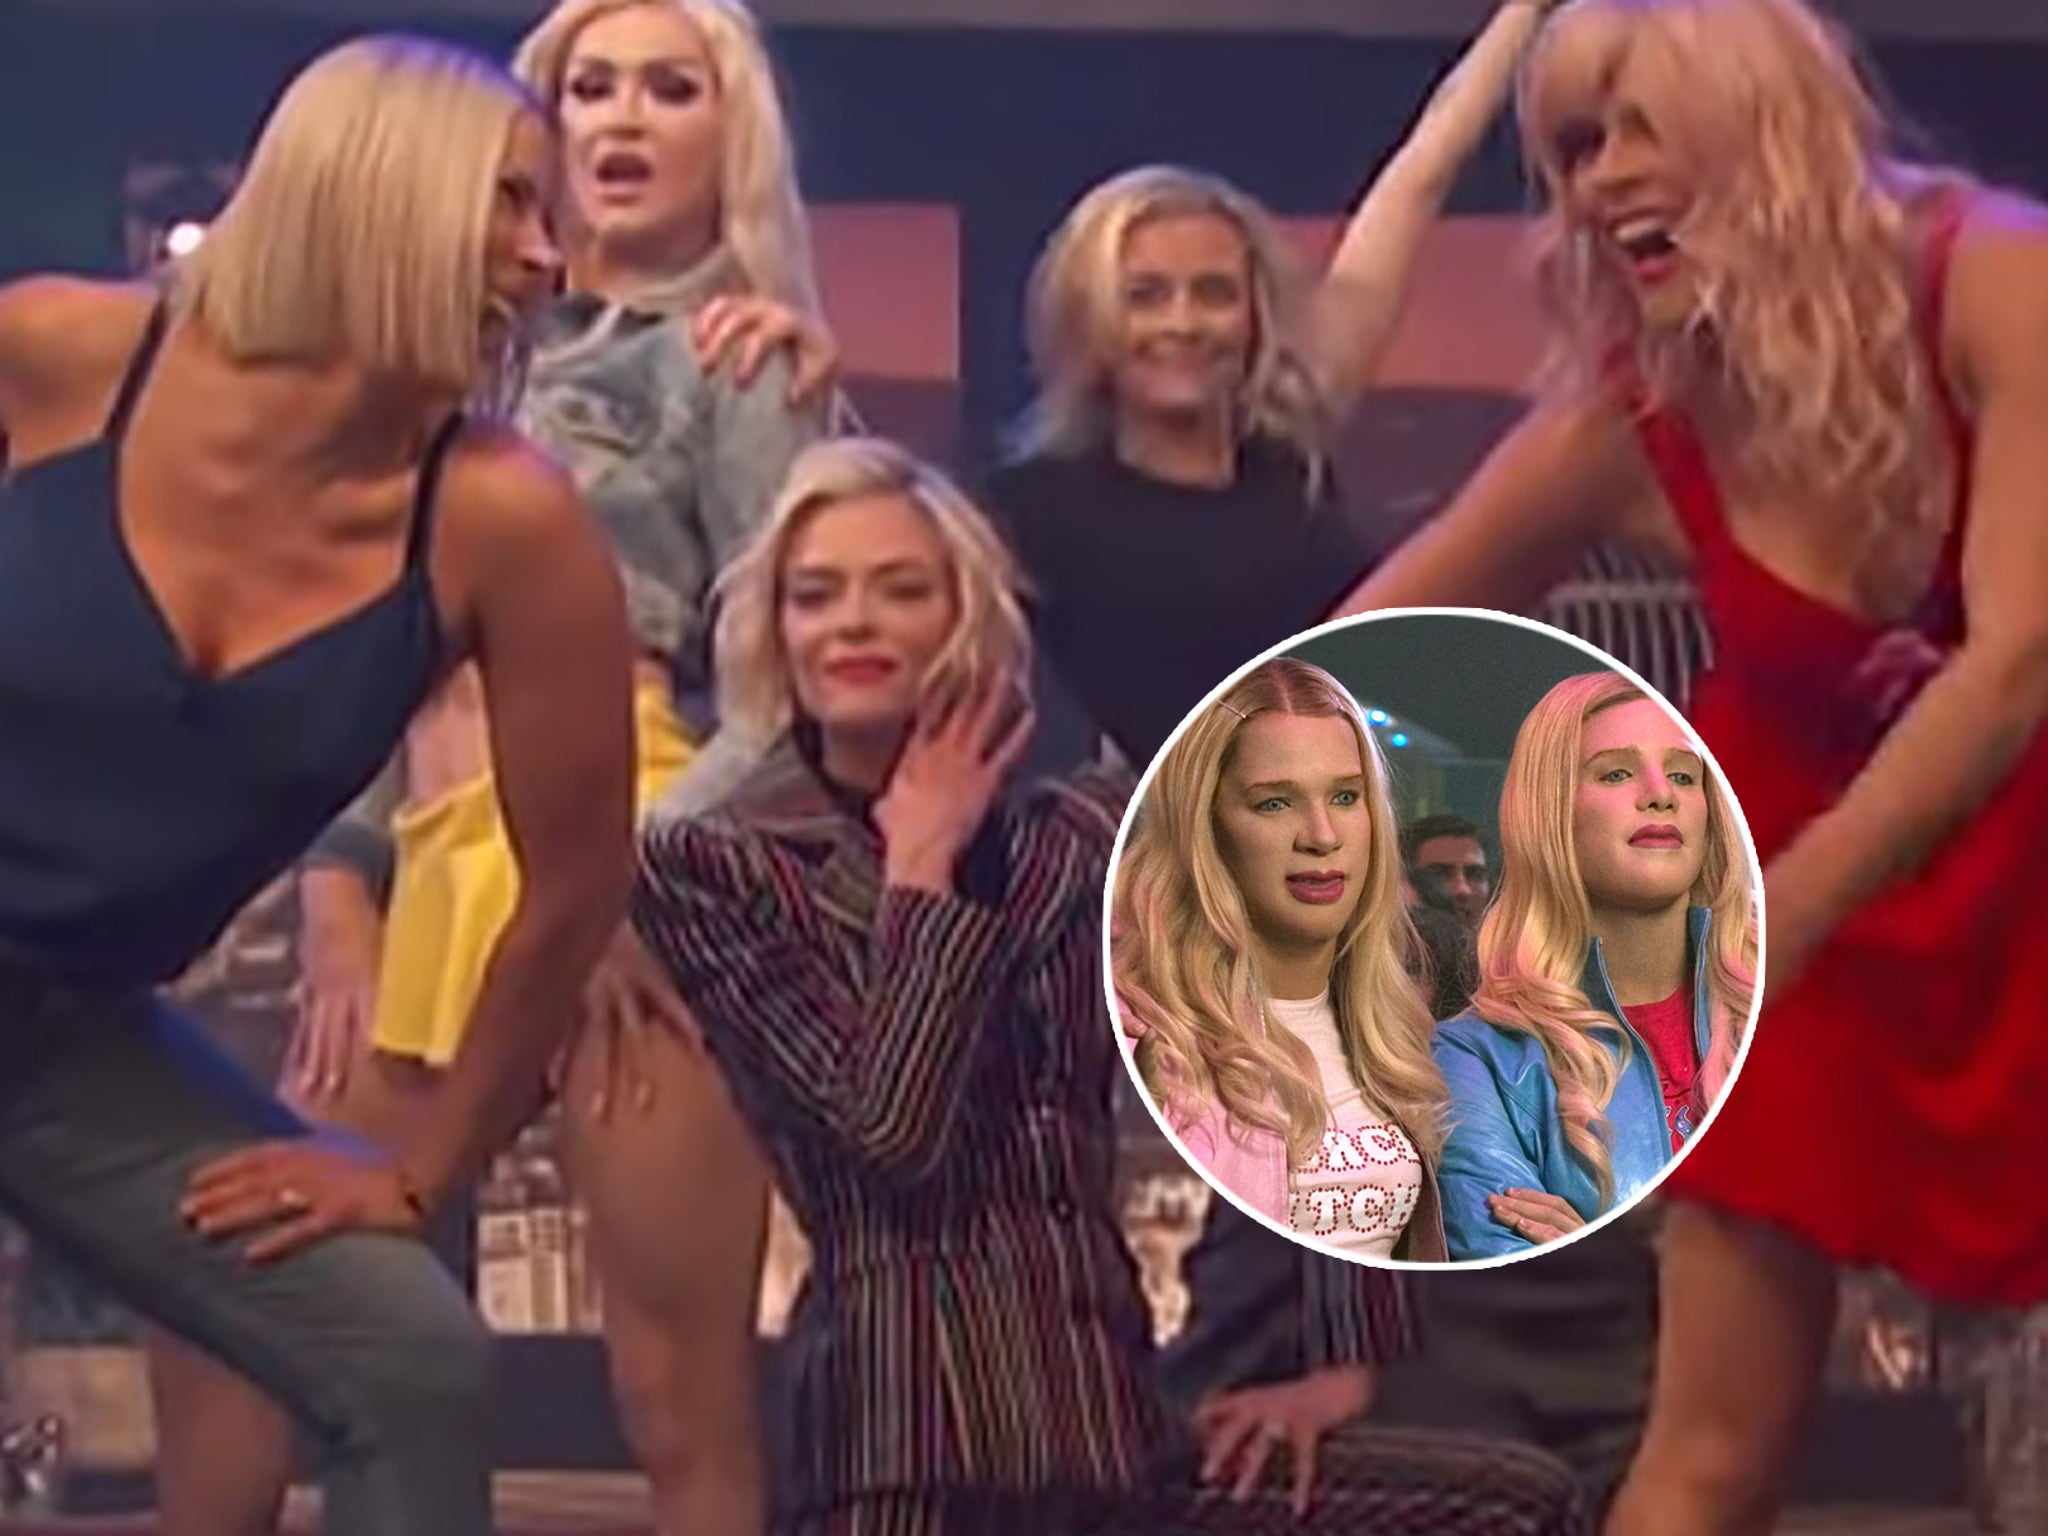 Watch our White Chicks dance off reunion. @busytonighttv @busyphilipps  @jaime_king @jessicacauffiel @xosonique @enews @people #whitechicks  #reunion, By Brittany Daniel